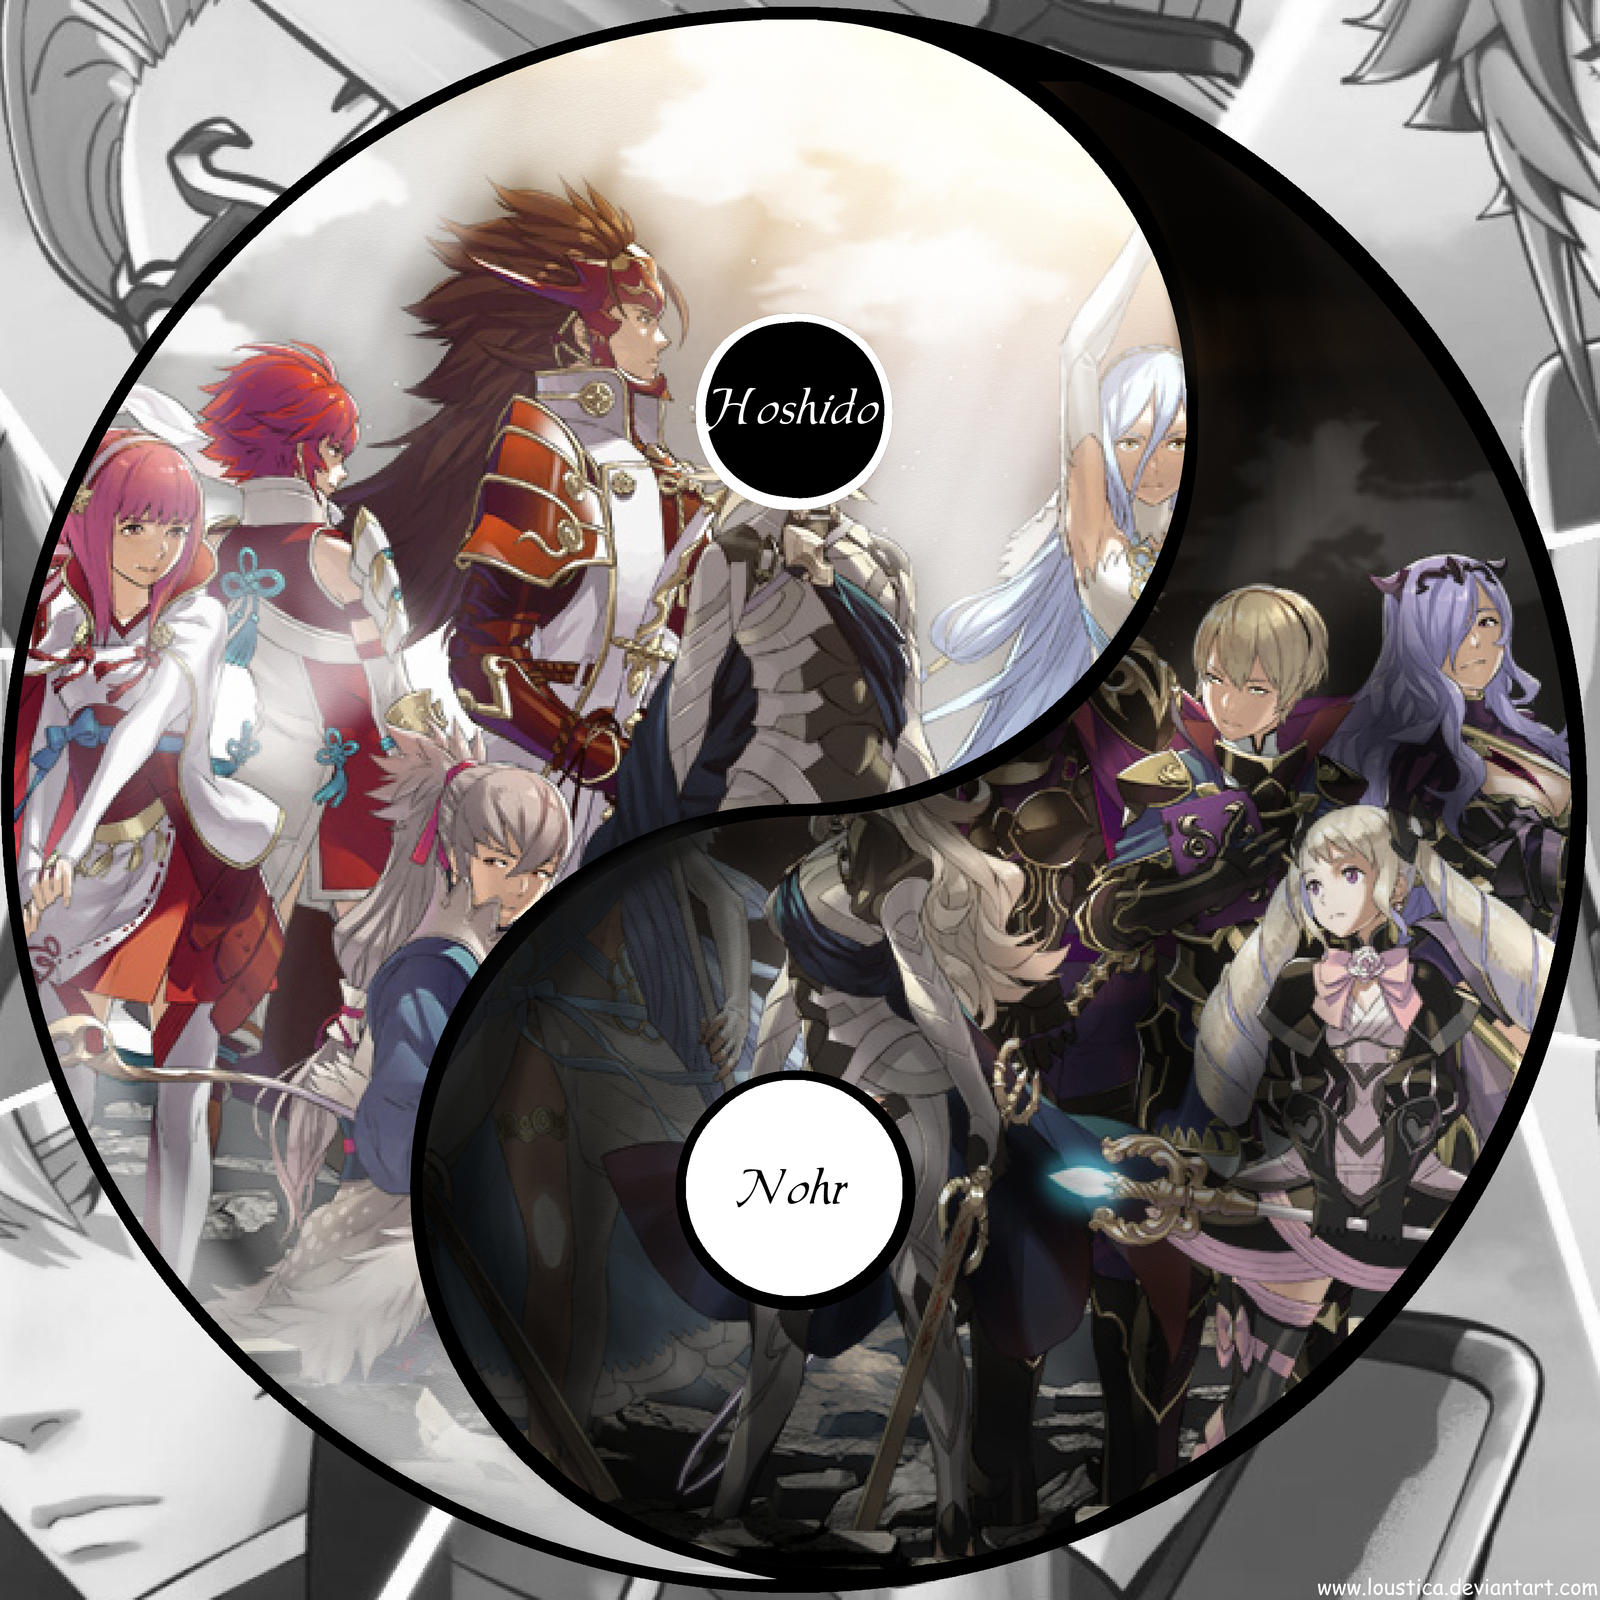 Fe If Fates Hoshido And Nohr Yin Yang By Loustica On Deviantart